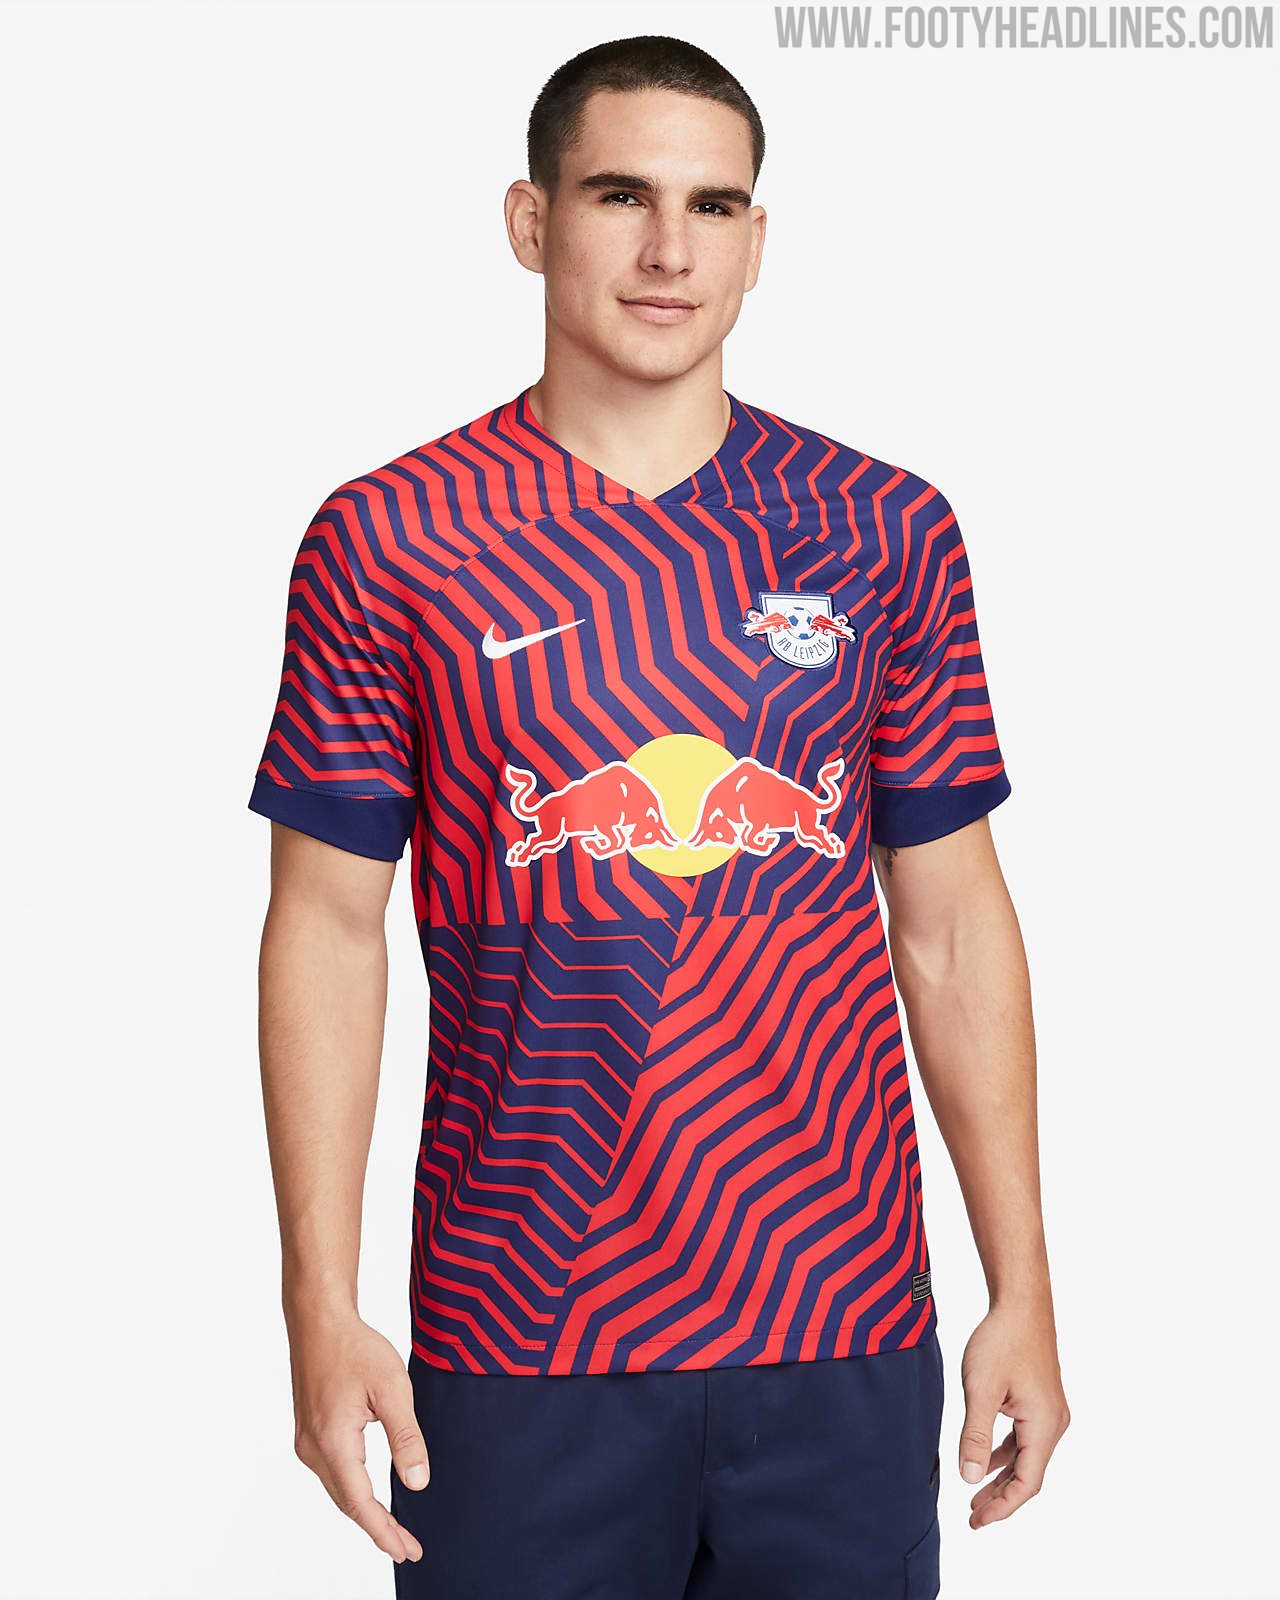 RB Leipzig Unveil 23/24 Away Shirt From Nike - SoccerBible